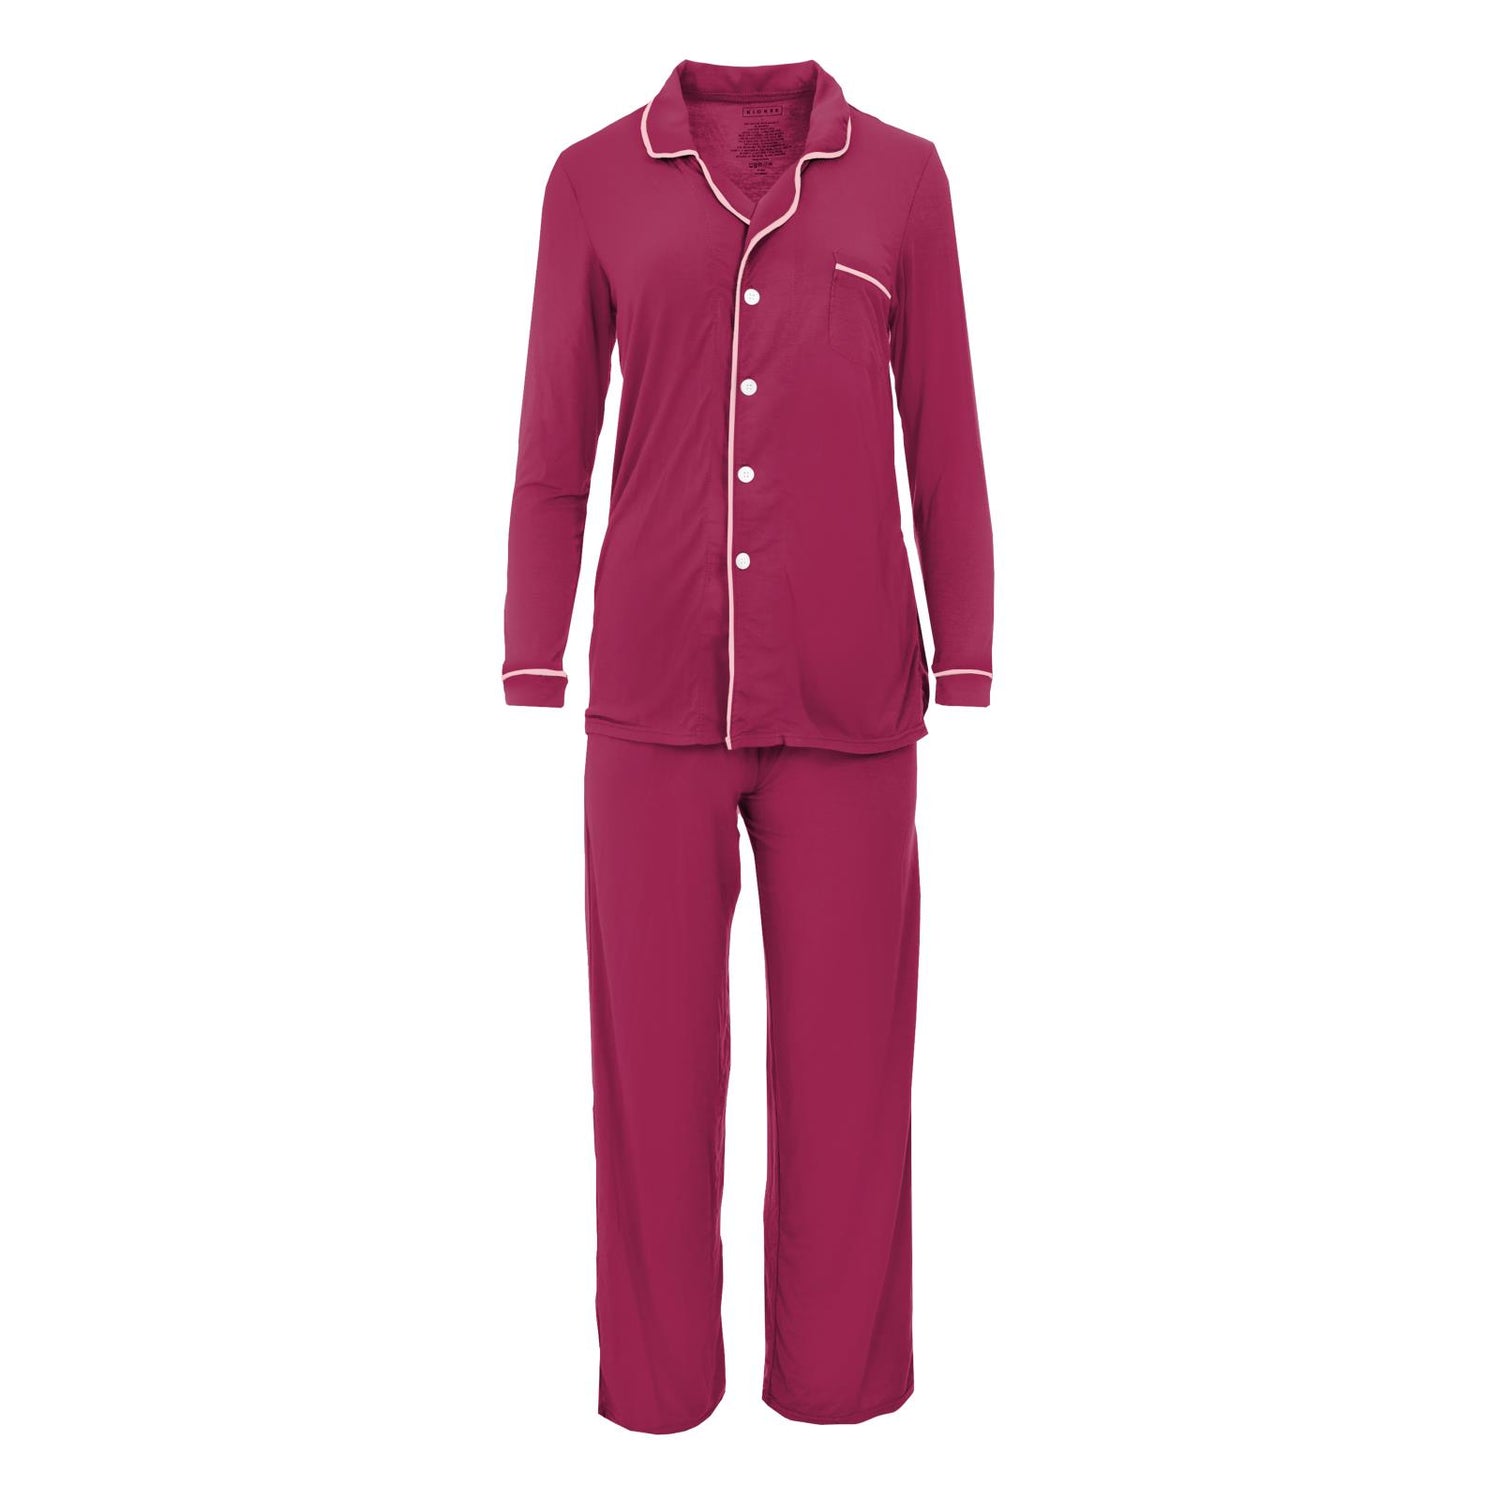 Women's Long Sleeved Collared Pajama Set in Berry with Lotus